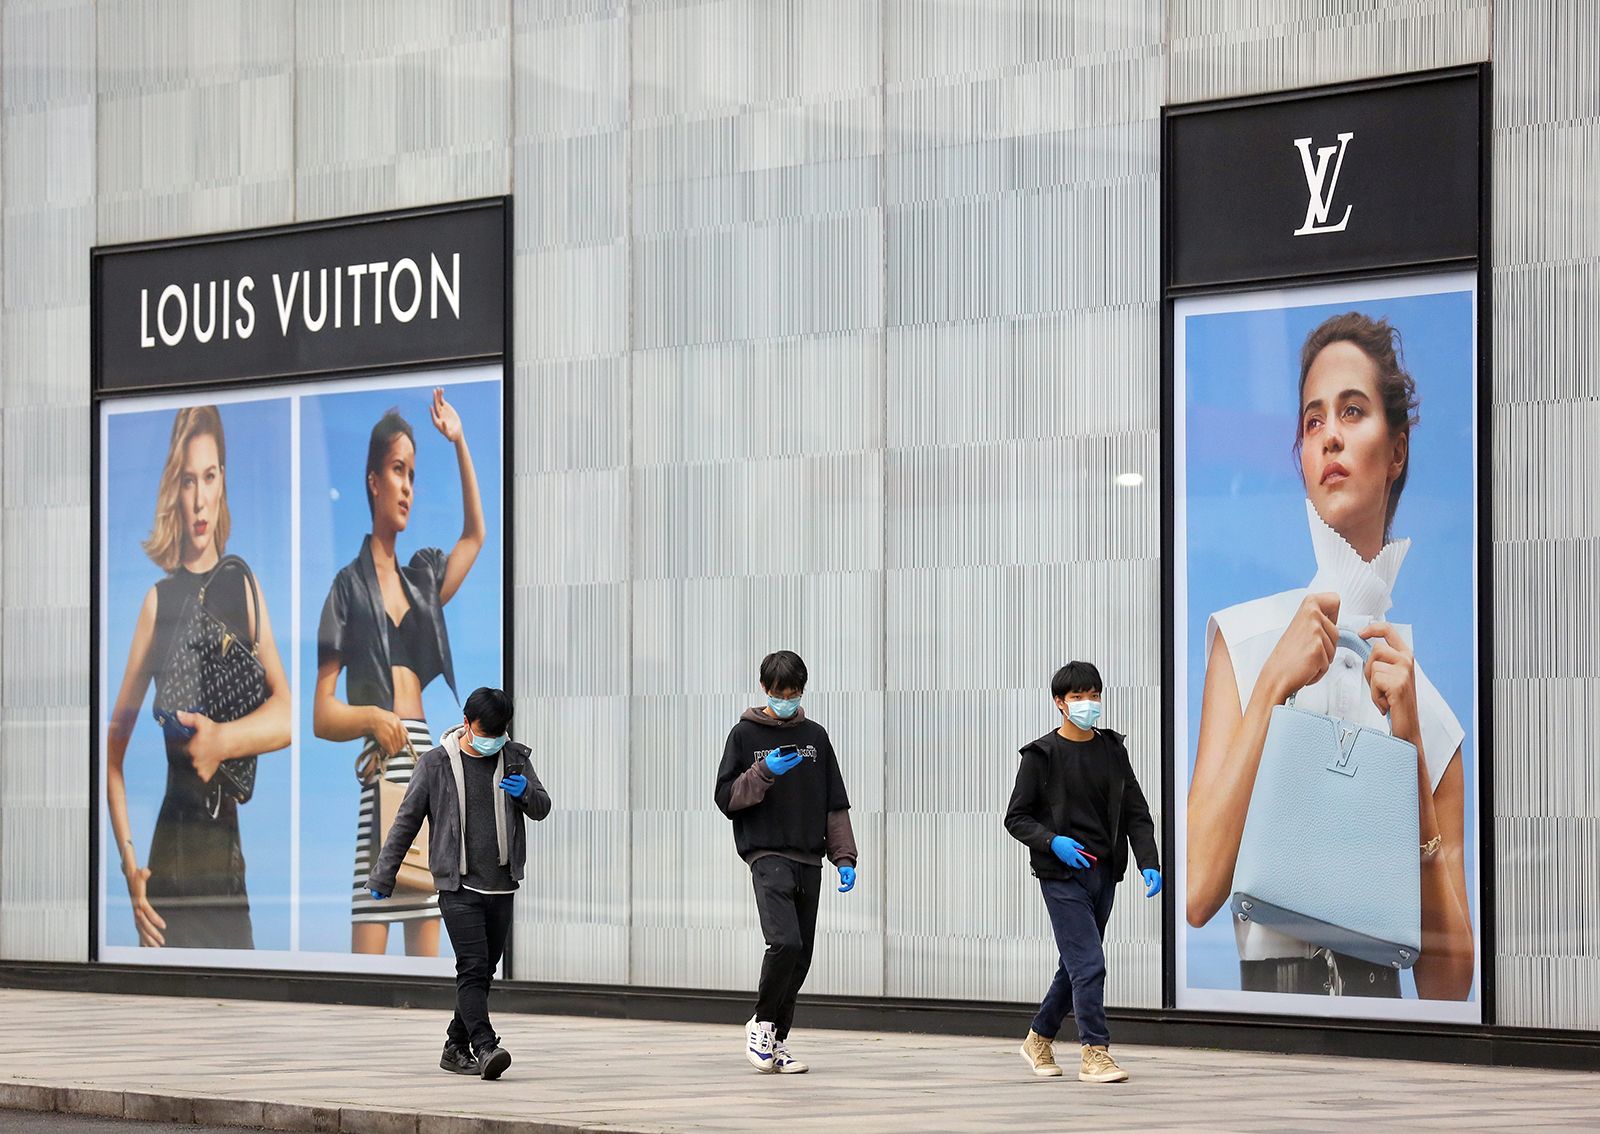 Why Did Consumers Go Crazy for Louis Vuitton's 26,700 RMB Inflatable Vest?  - China Marketing Insights